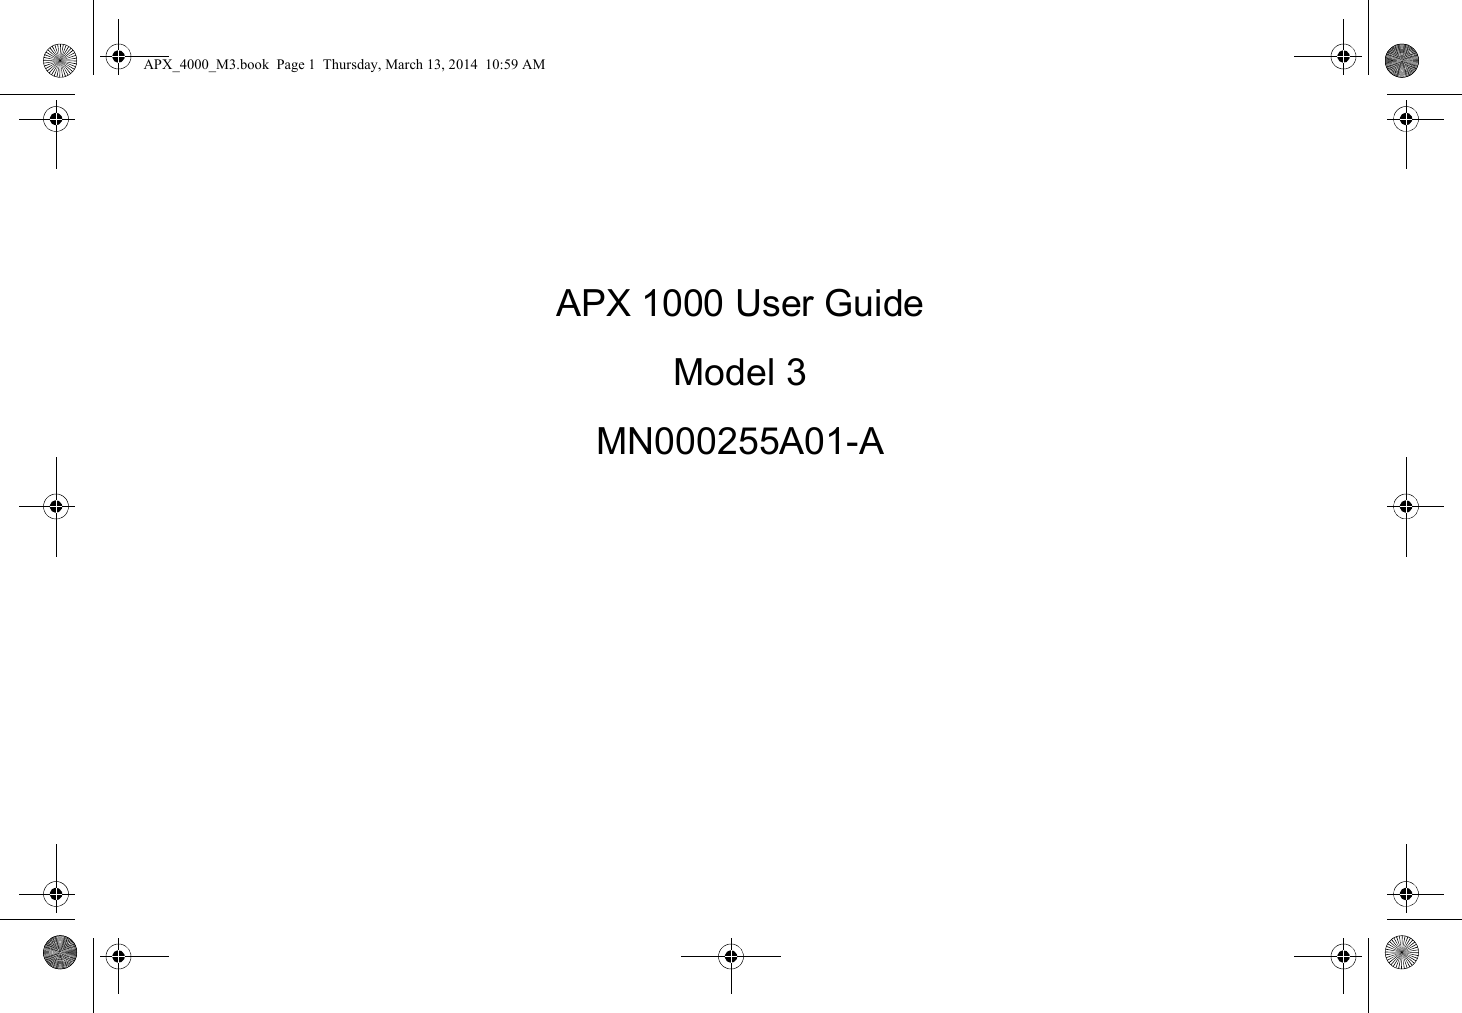 APX 1000 User GuideModel 3 MN000255A01-AAPX_4000_M3.book  Page 1  Thursday, March 13, 2014  10:59 AM